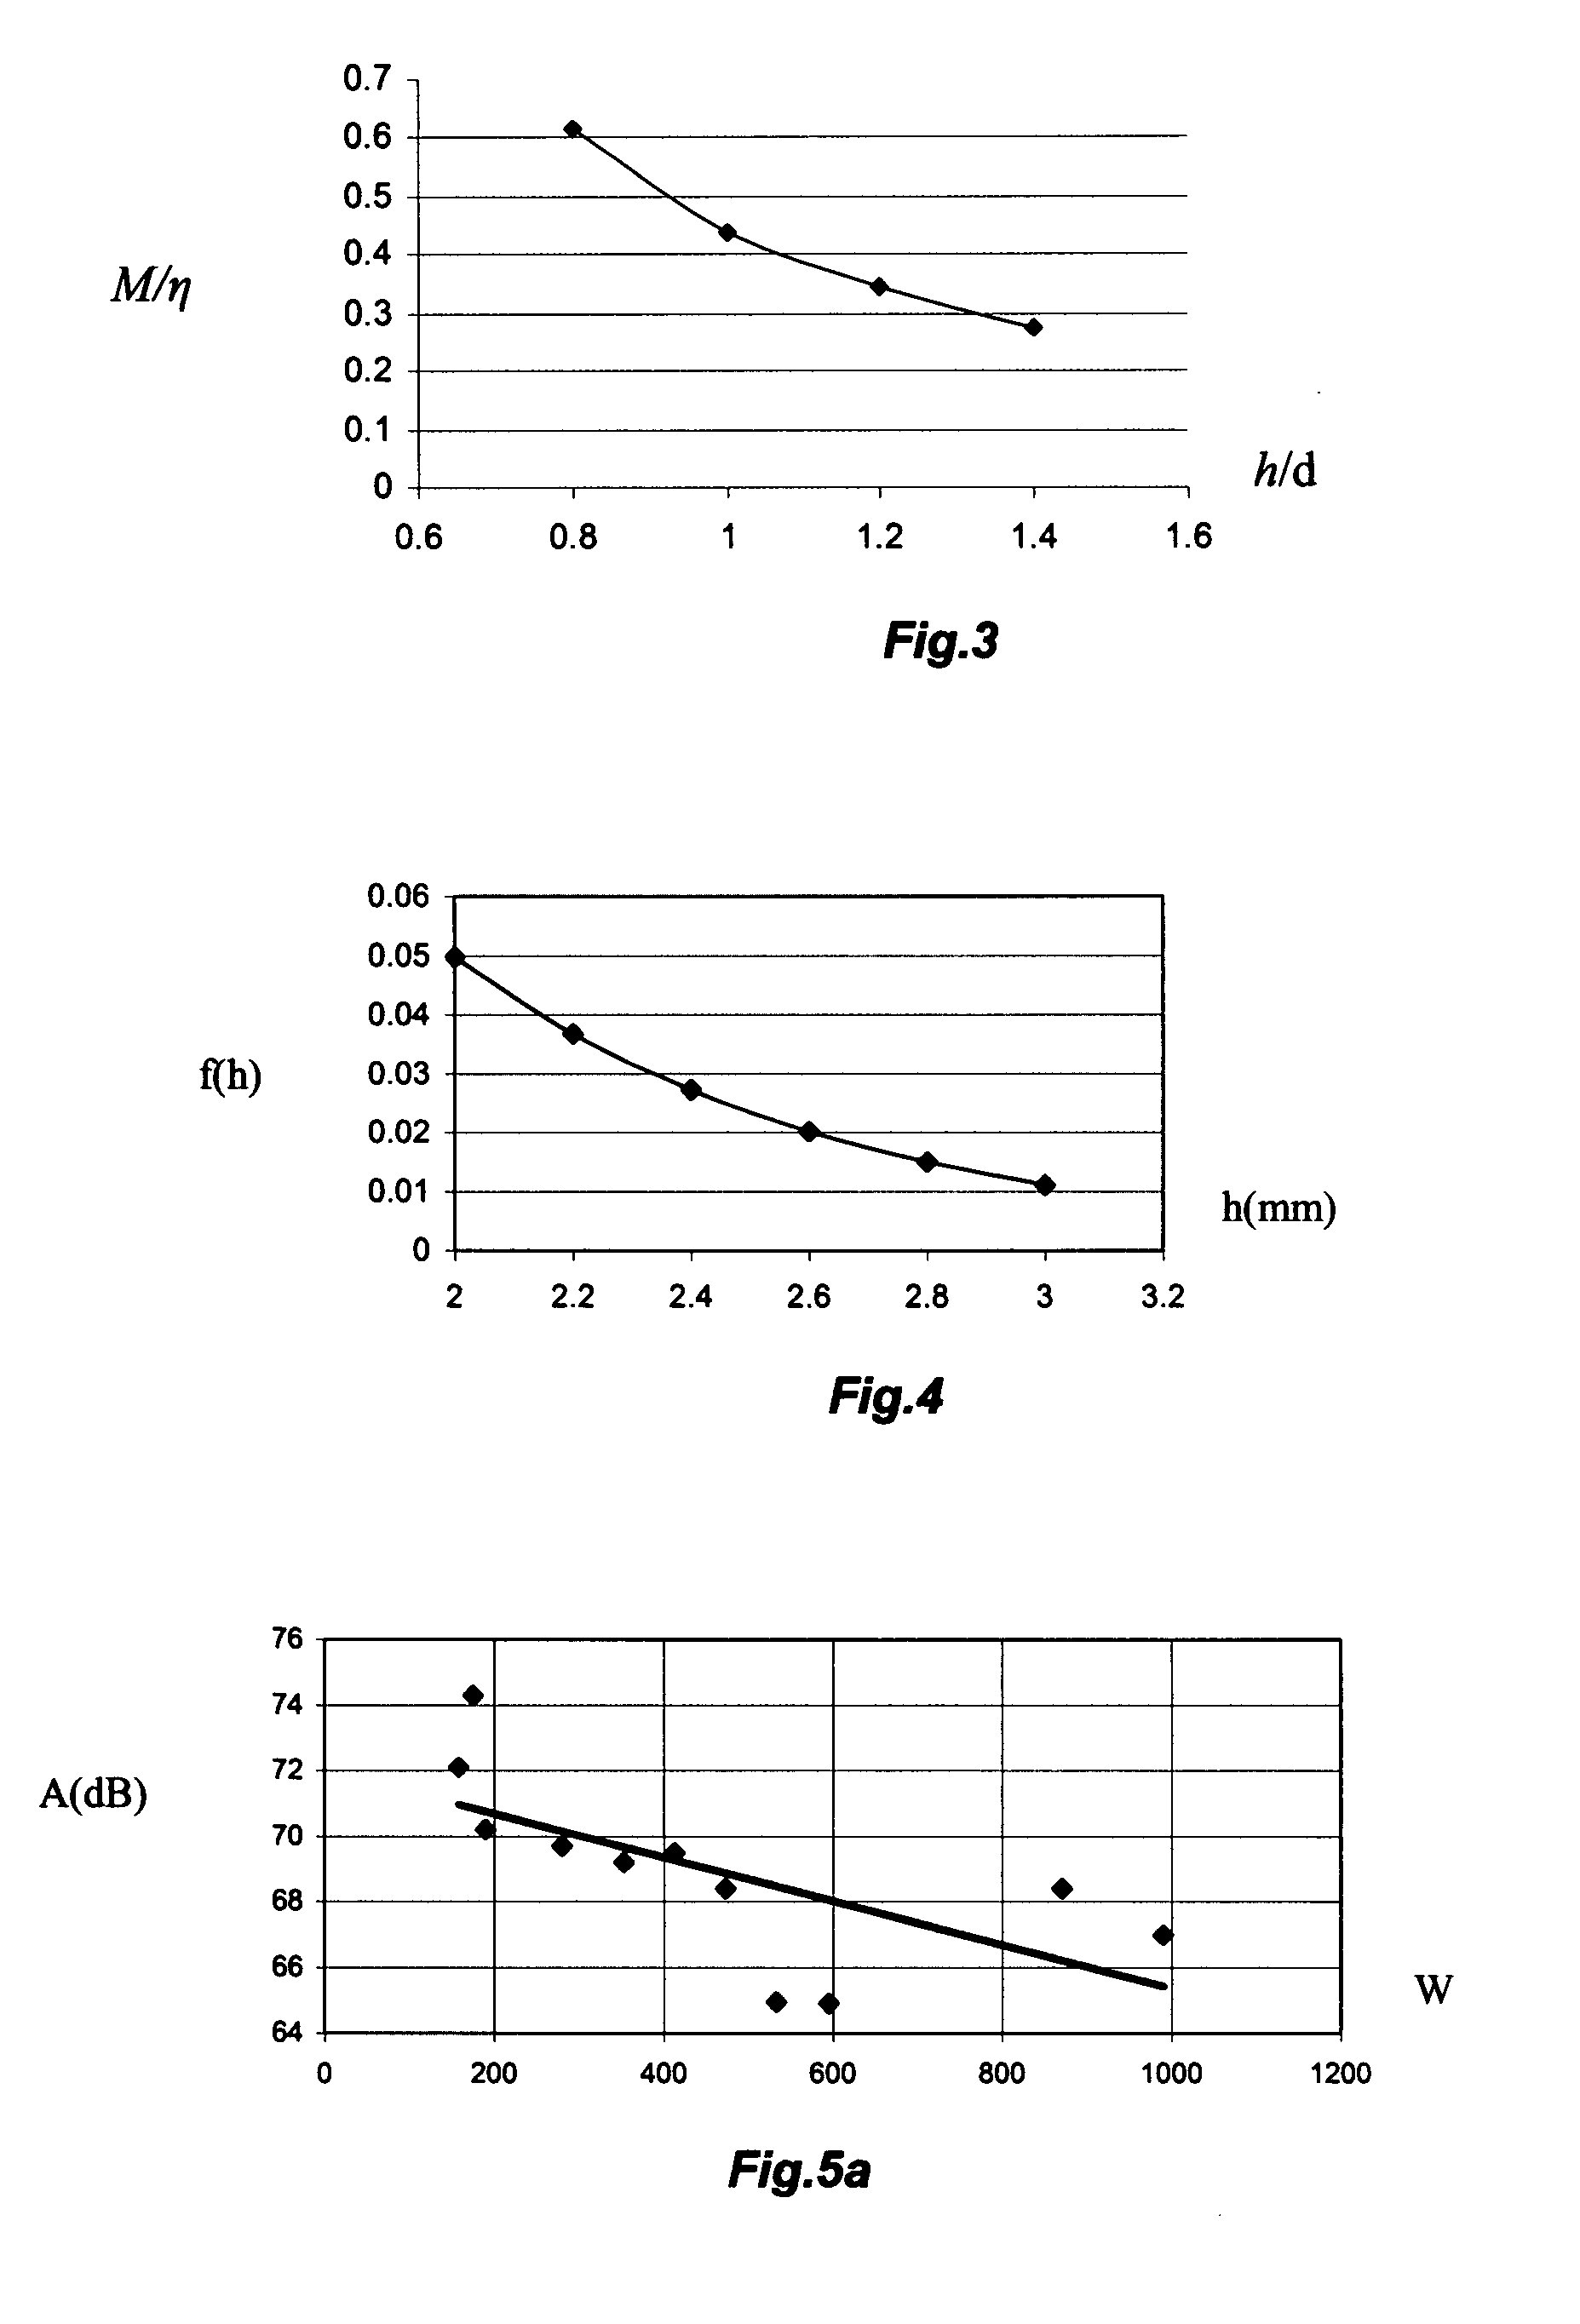 Apparatus and method for determining service life of electrochemical energy sources using combined ultrasonic and electromagnetic testing